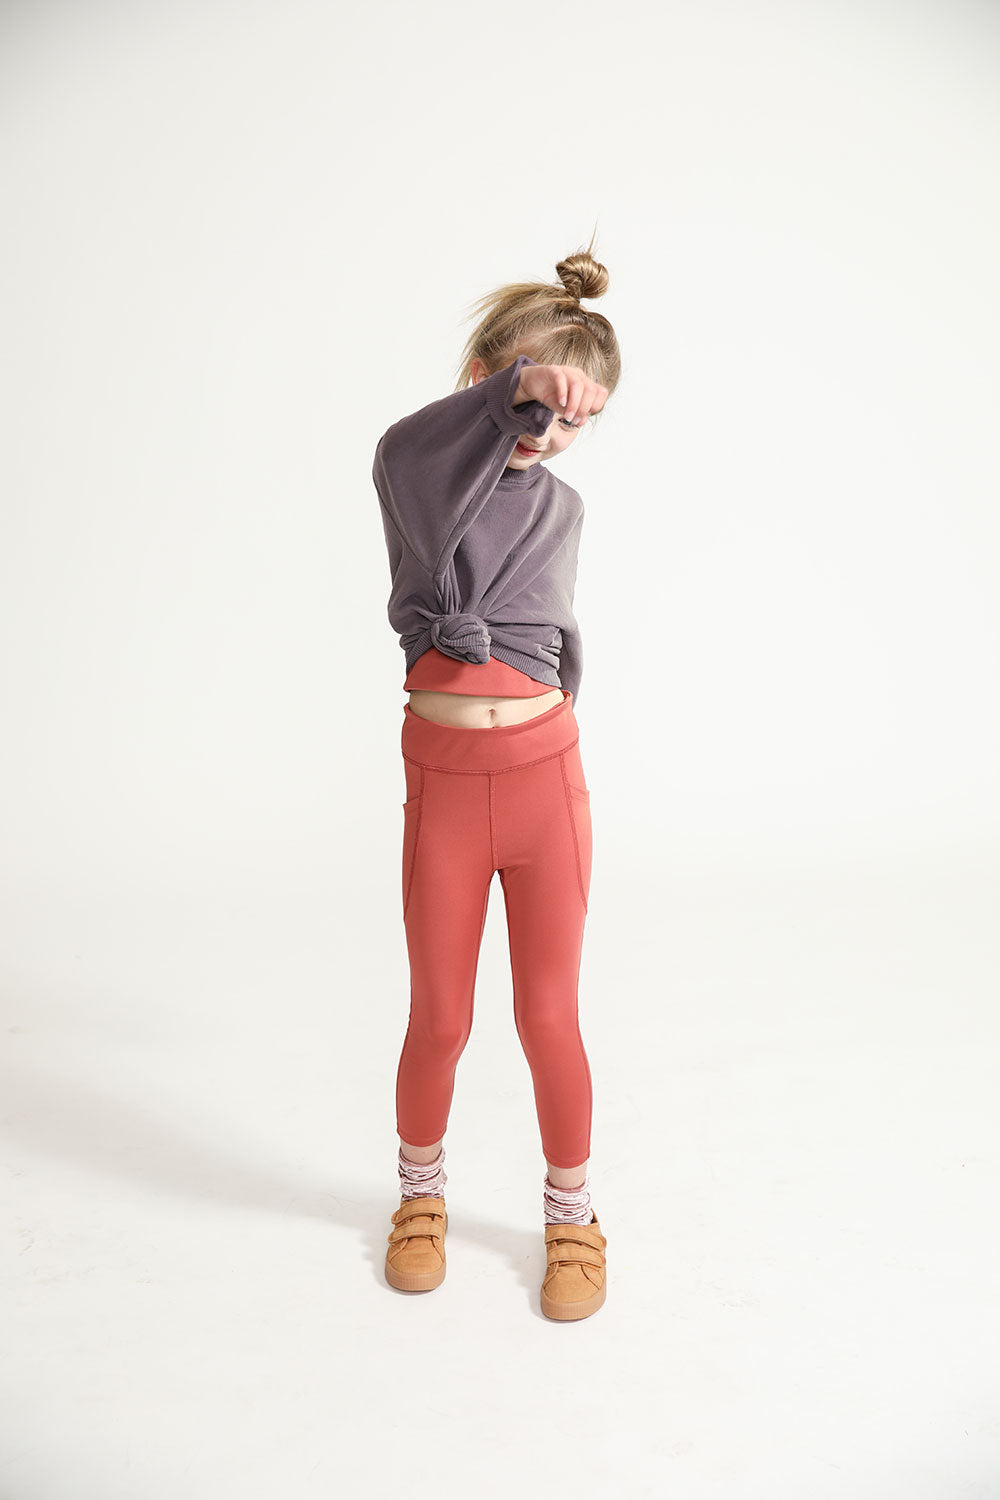 All Day Leggings in Spice – Everyway